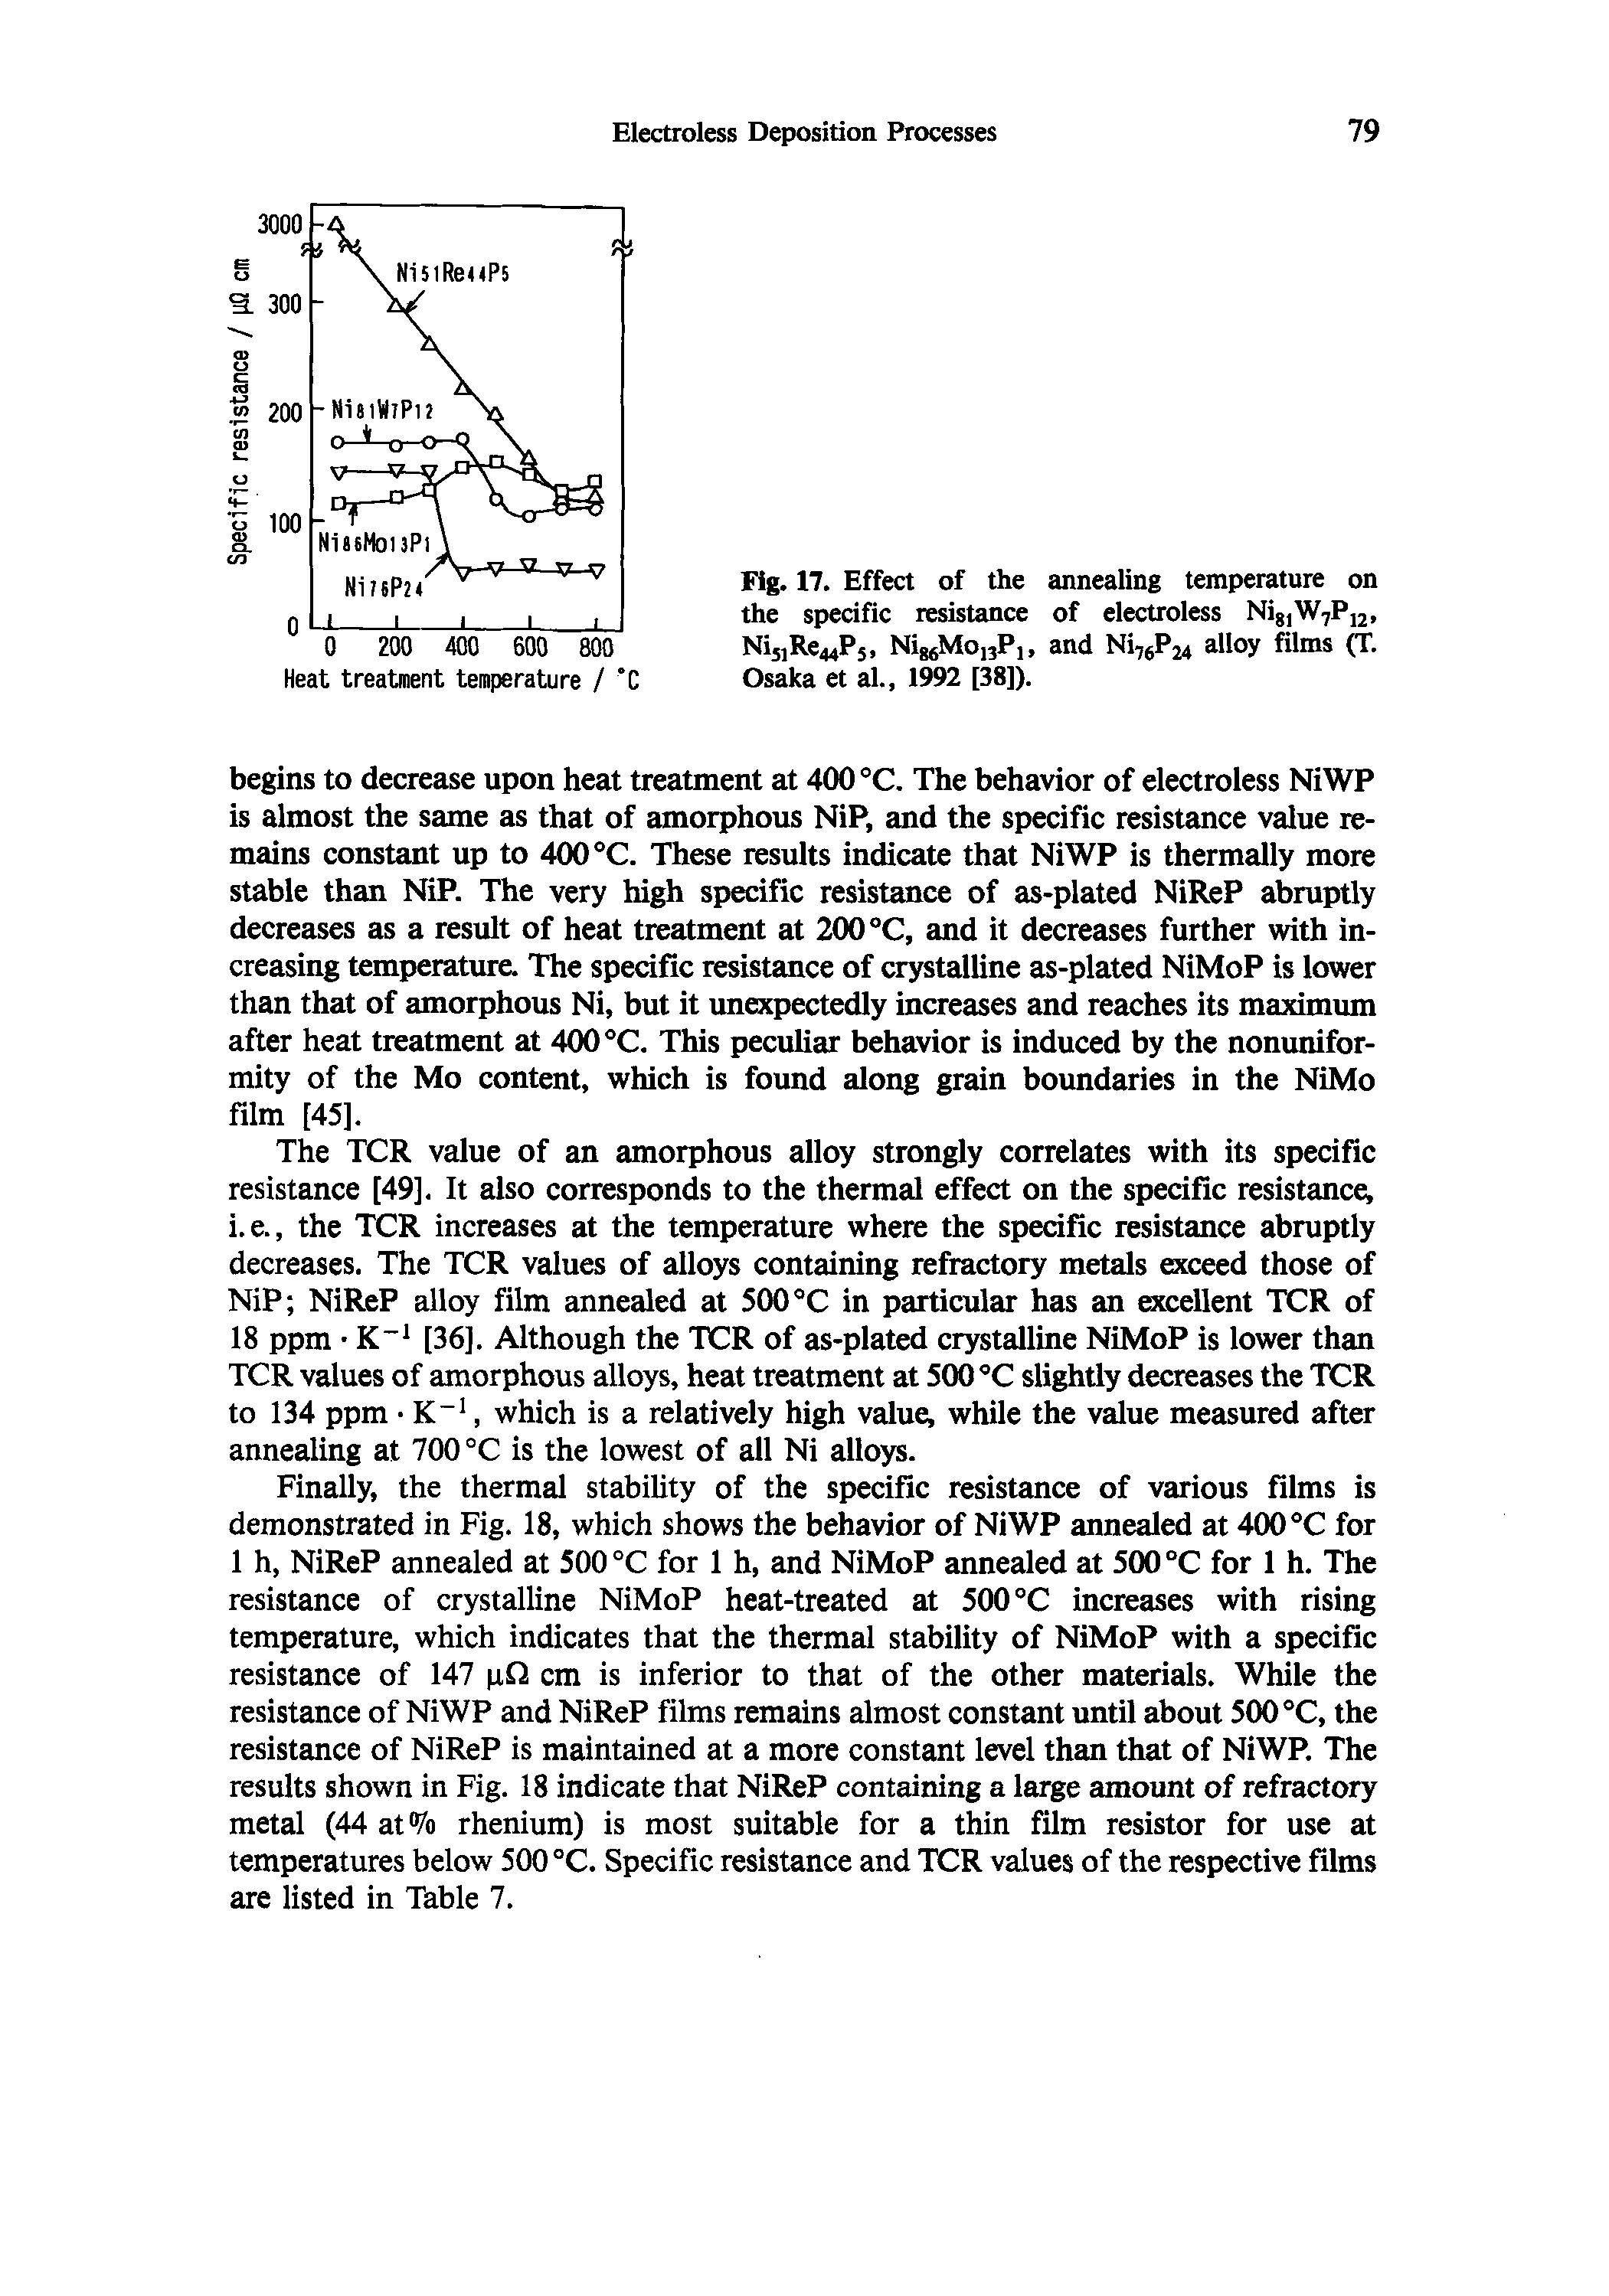 Fig. 17. Effect of the annealing temperature on the specific resistance of electroless Nig,W7Pj2, Ni5,Re44P5, NiggMoijPi, and Ni7( P24 alloy films Osaka et al., 1992 [38]).